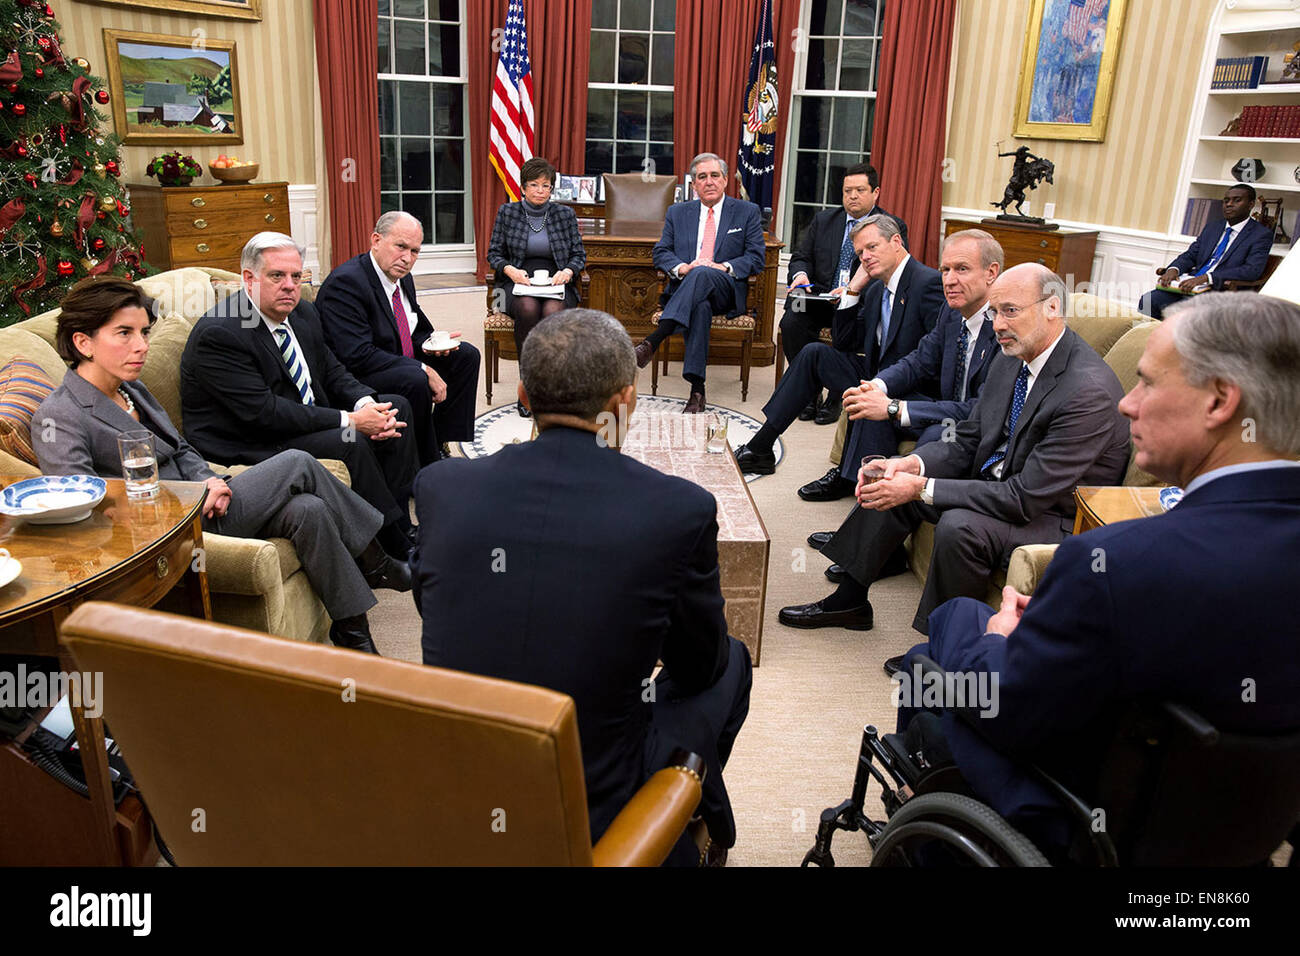 President Barack Obama meets with newly elected governors in the Oval Office, Dec. 5, 2014. From left are Rhode Island Governor Gina Raimondo, Maryland Governor Larry Hogan, Alaska Governor Bill Walker, Senior Advisor Valerie Jarrett, Jerry Abramson, Director of Intergovernmental Affairs, Adrian Saenz, Deputy Director of Intergovernmental Affairs, Massachusetts Governor Charlie Baker, Illinois Governor Bruce Rauner, Pennsylvania Governor Tom Wolf and Texas Governor Greg Abbott. Stock Photo